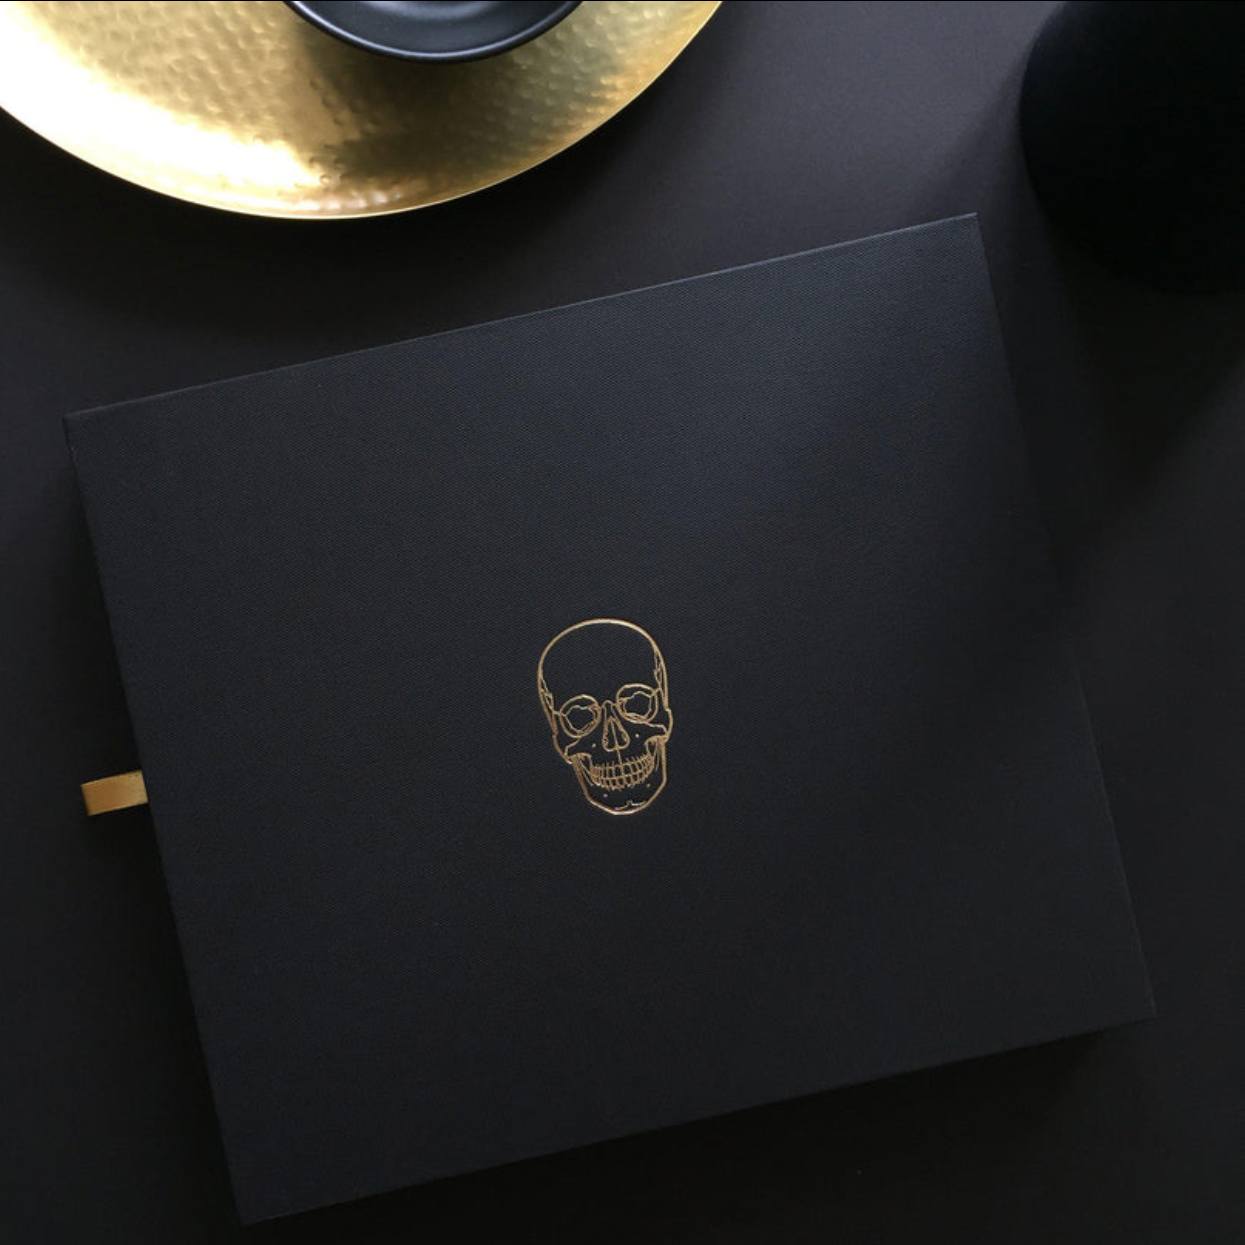 Anatomy in Black - Deluxe Edition